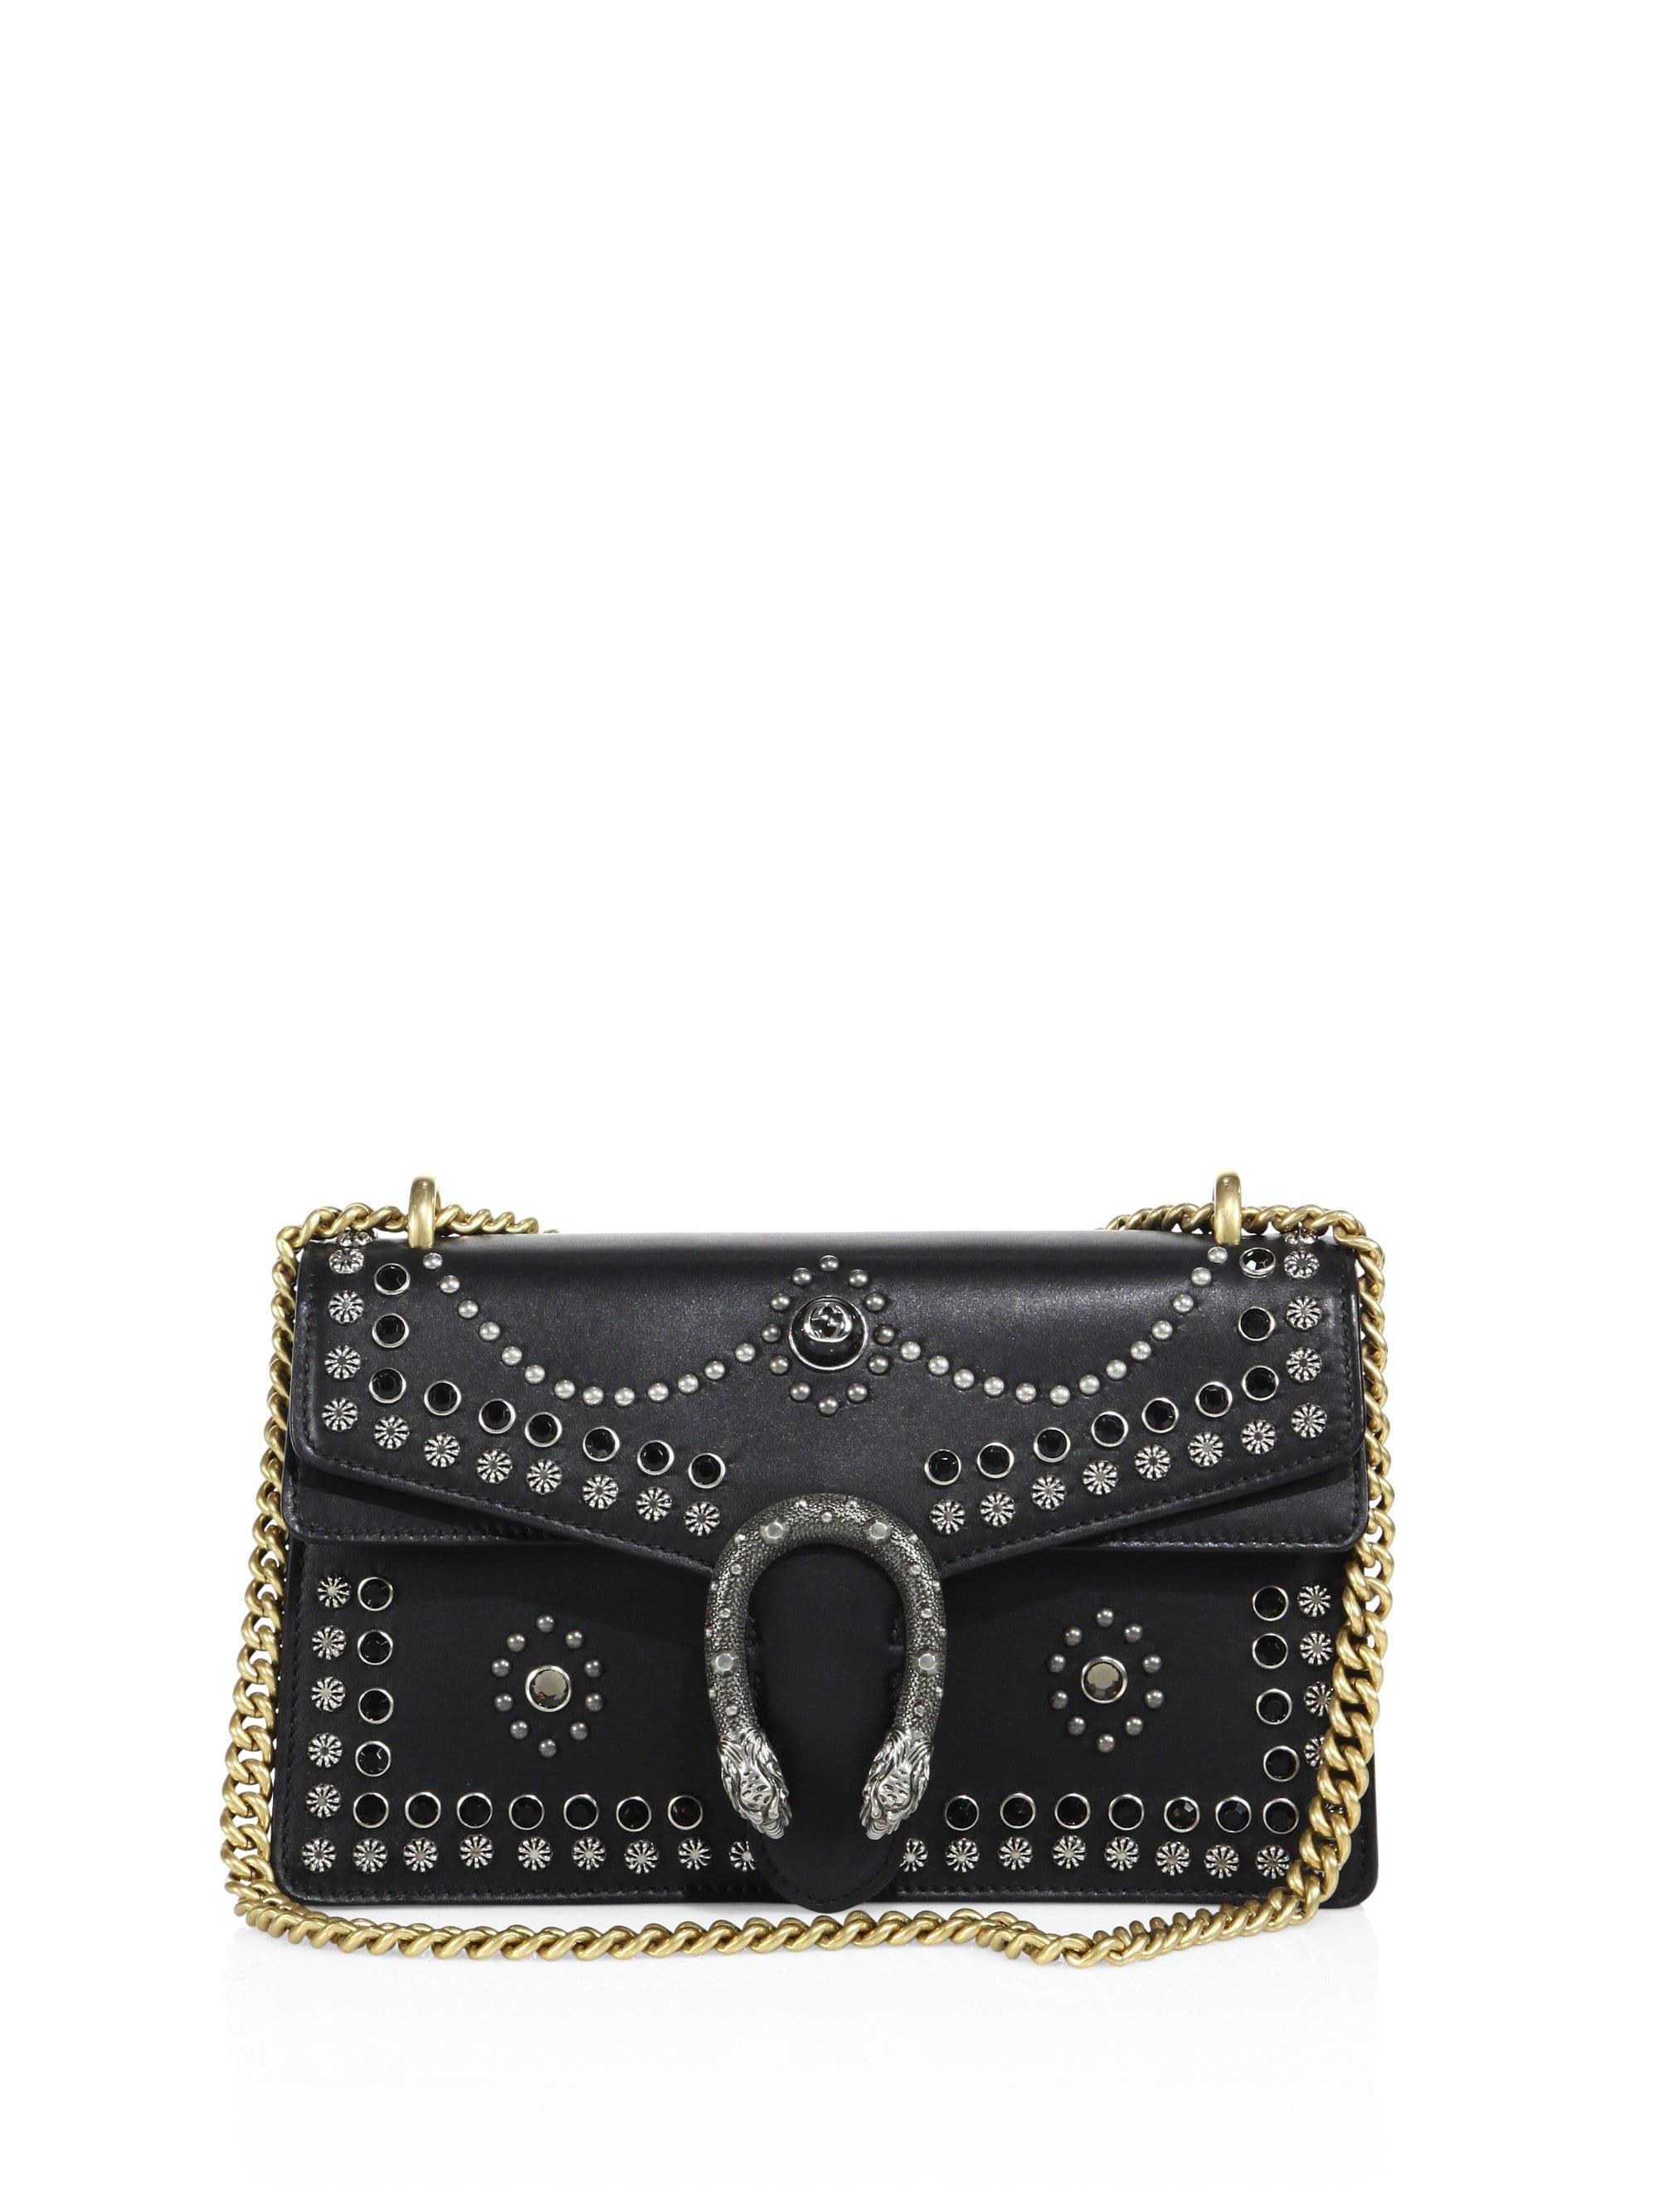 Gucci Women&#39;s Small Dionysus Studded Leather Shoulder Bag - Black Print in Black - Lyst